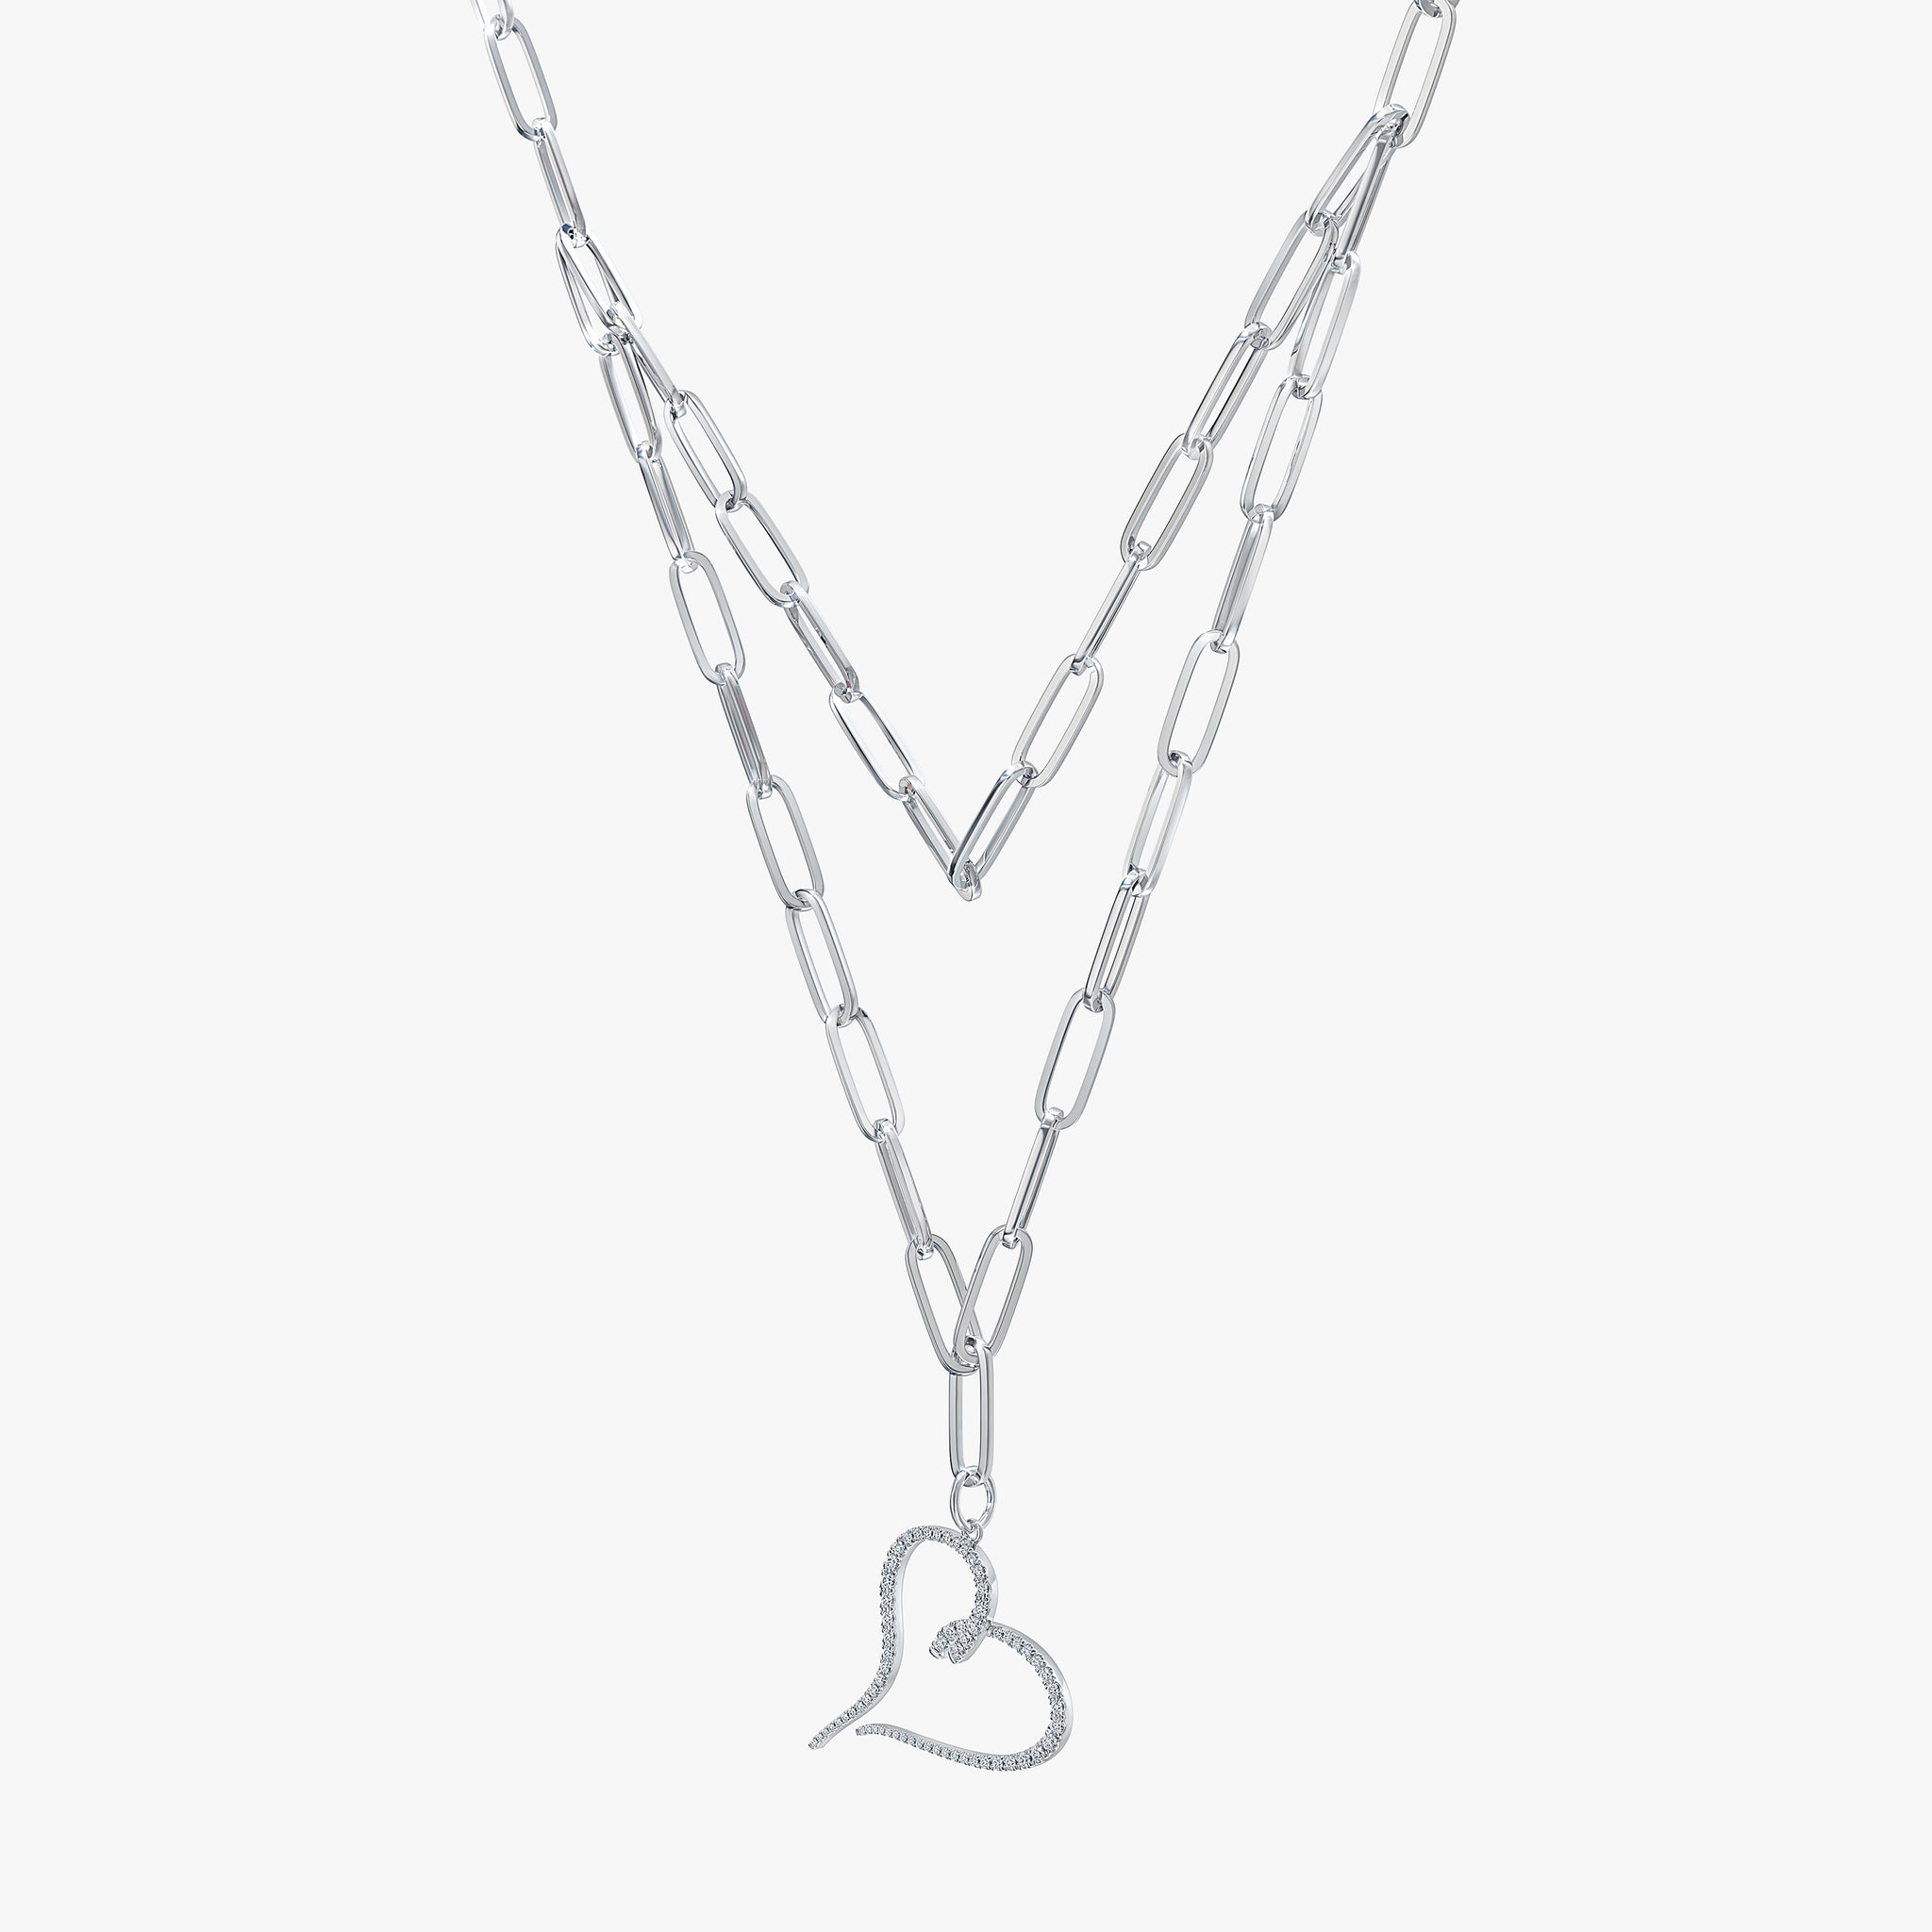 J'EVAR 14KT White Gold Two Row Paperclip Heart ALTR Lab Grown Diamond Necklace Perspective View